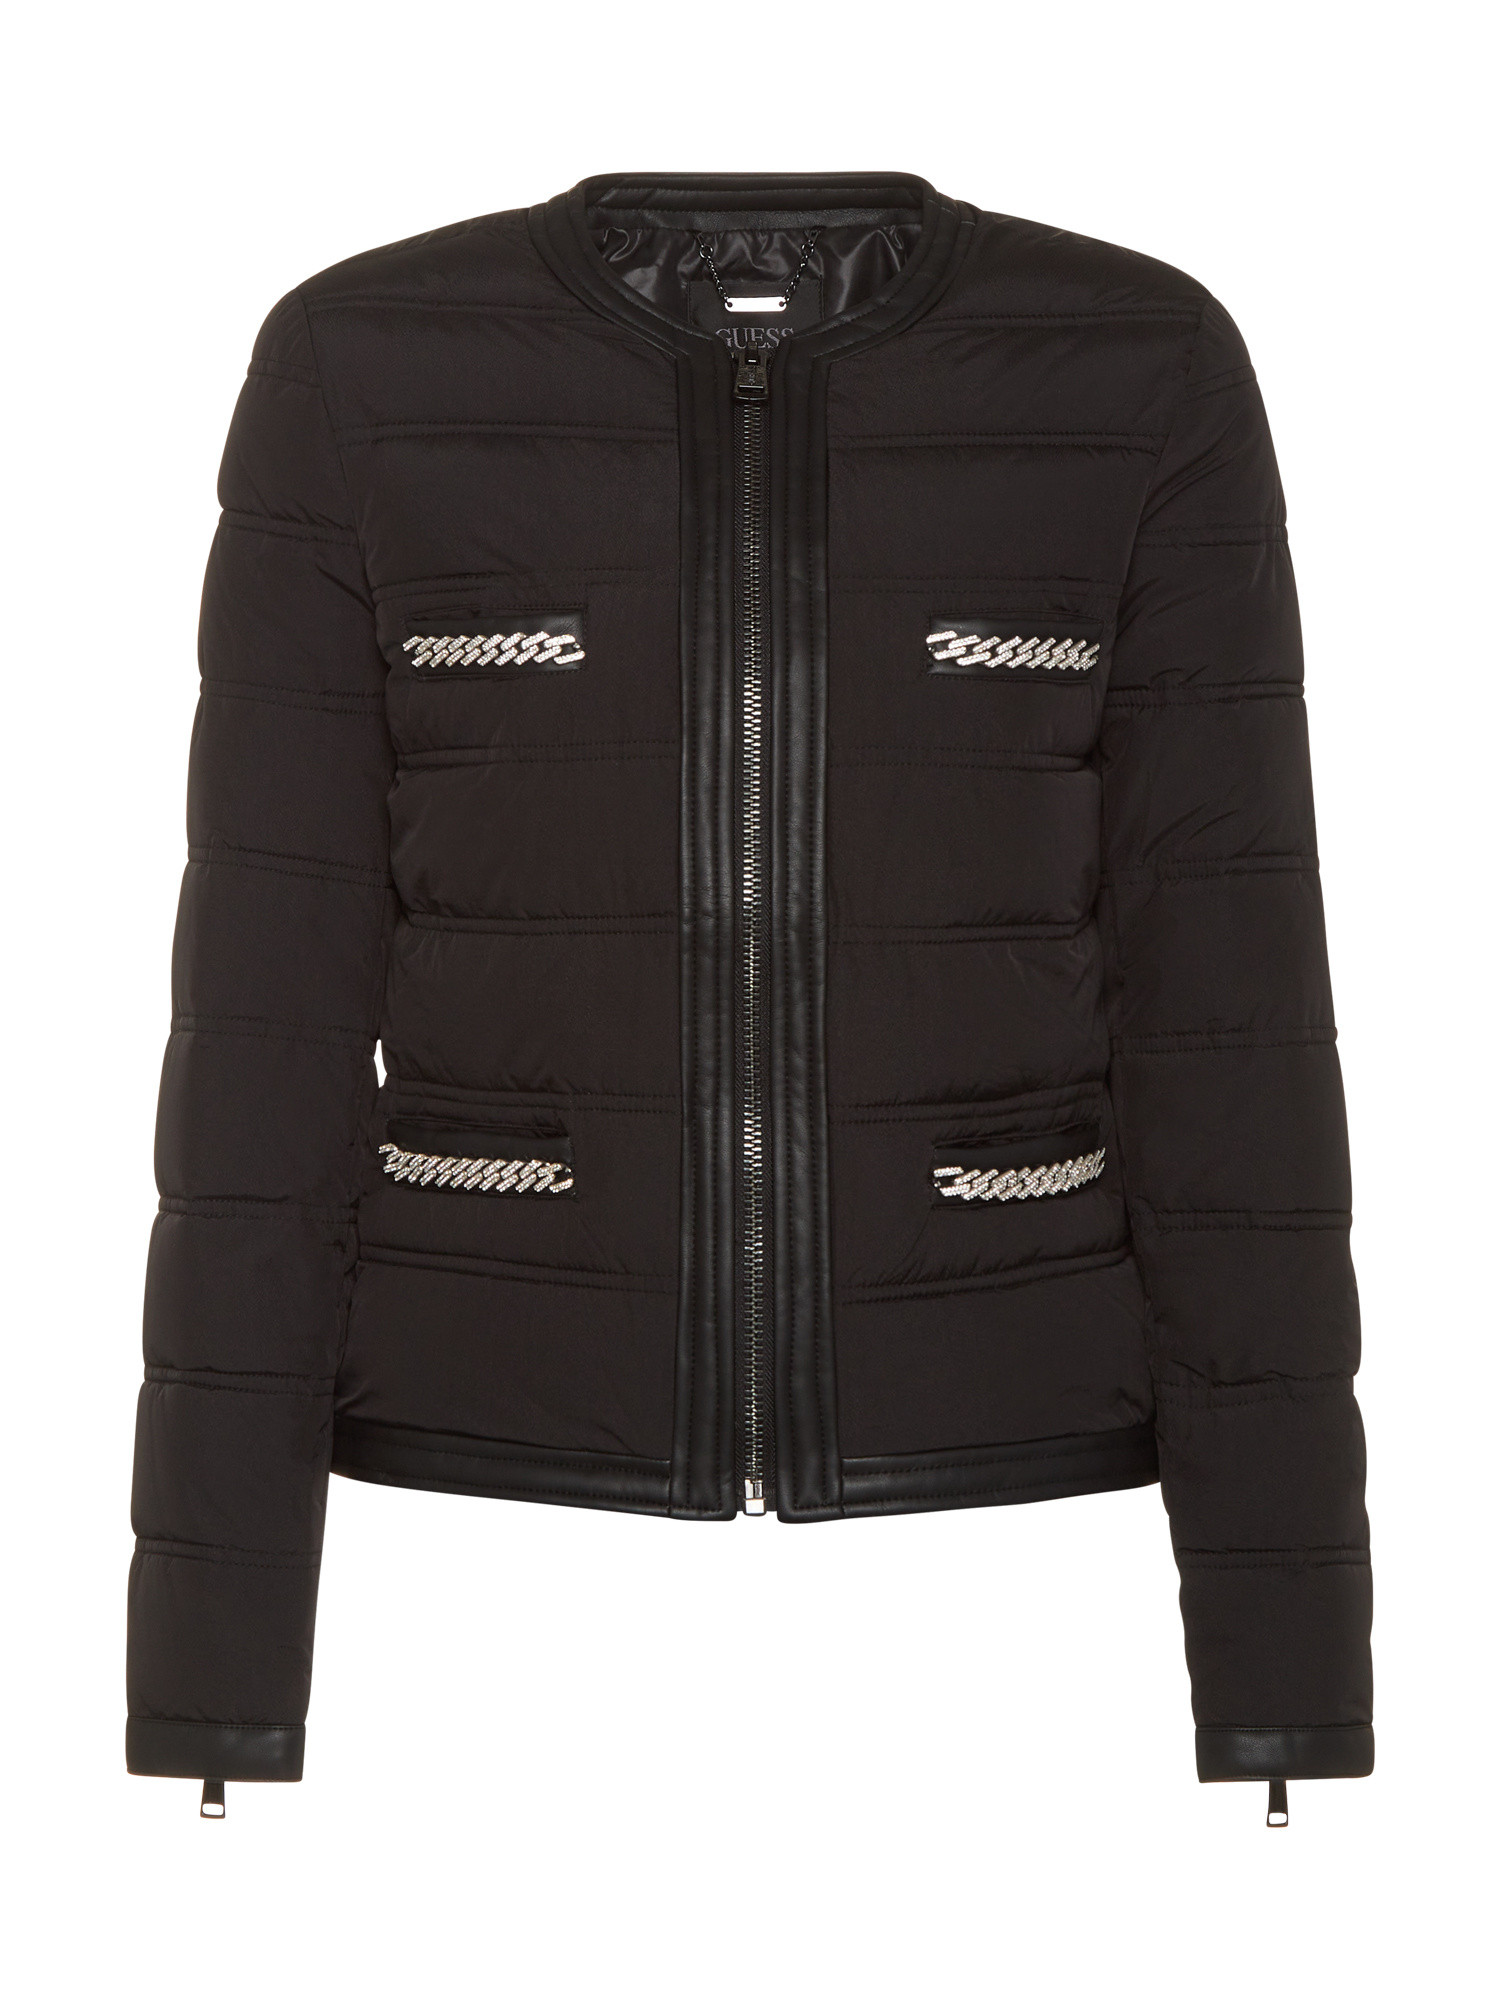 Guess - Down jacket with chain detail, Black, large image number 0